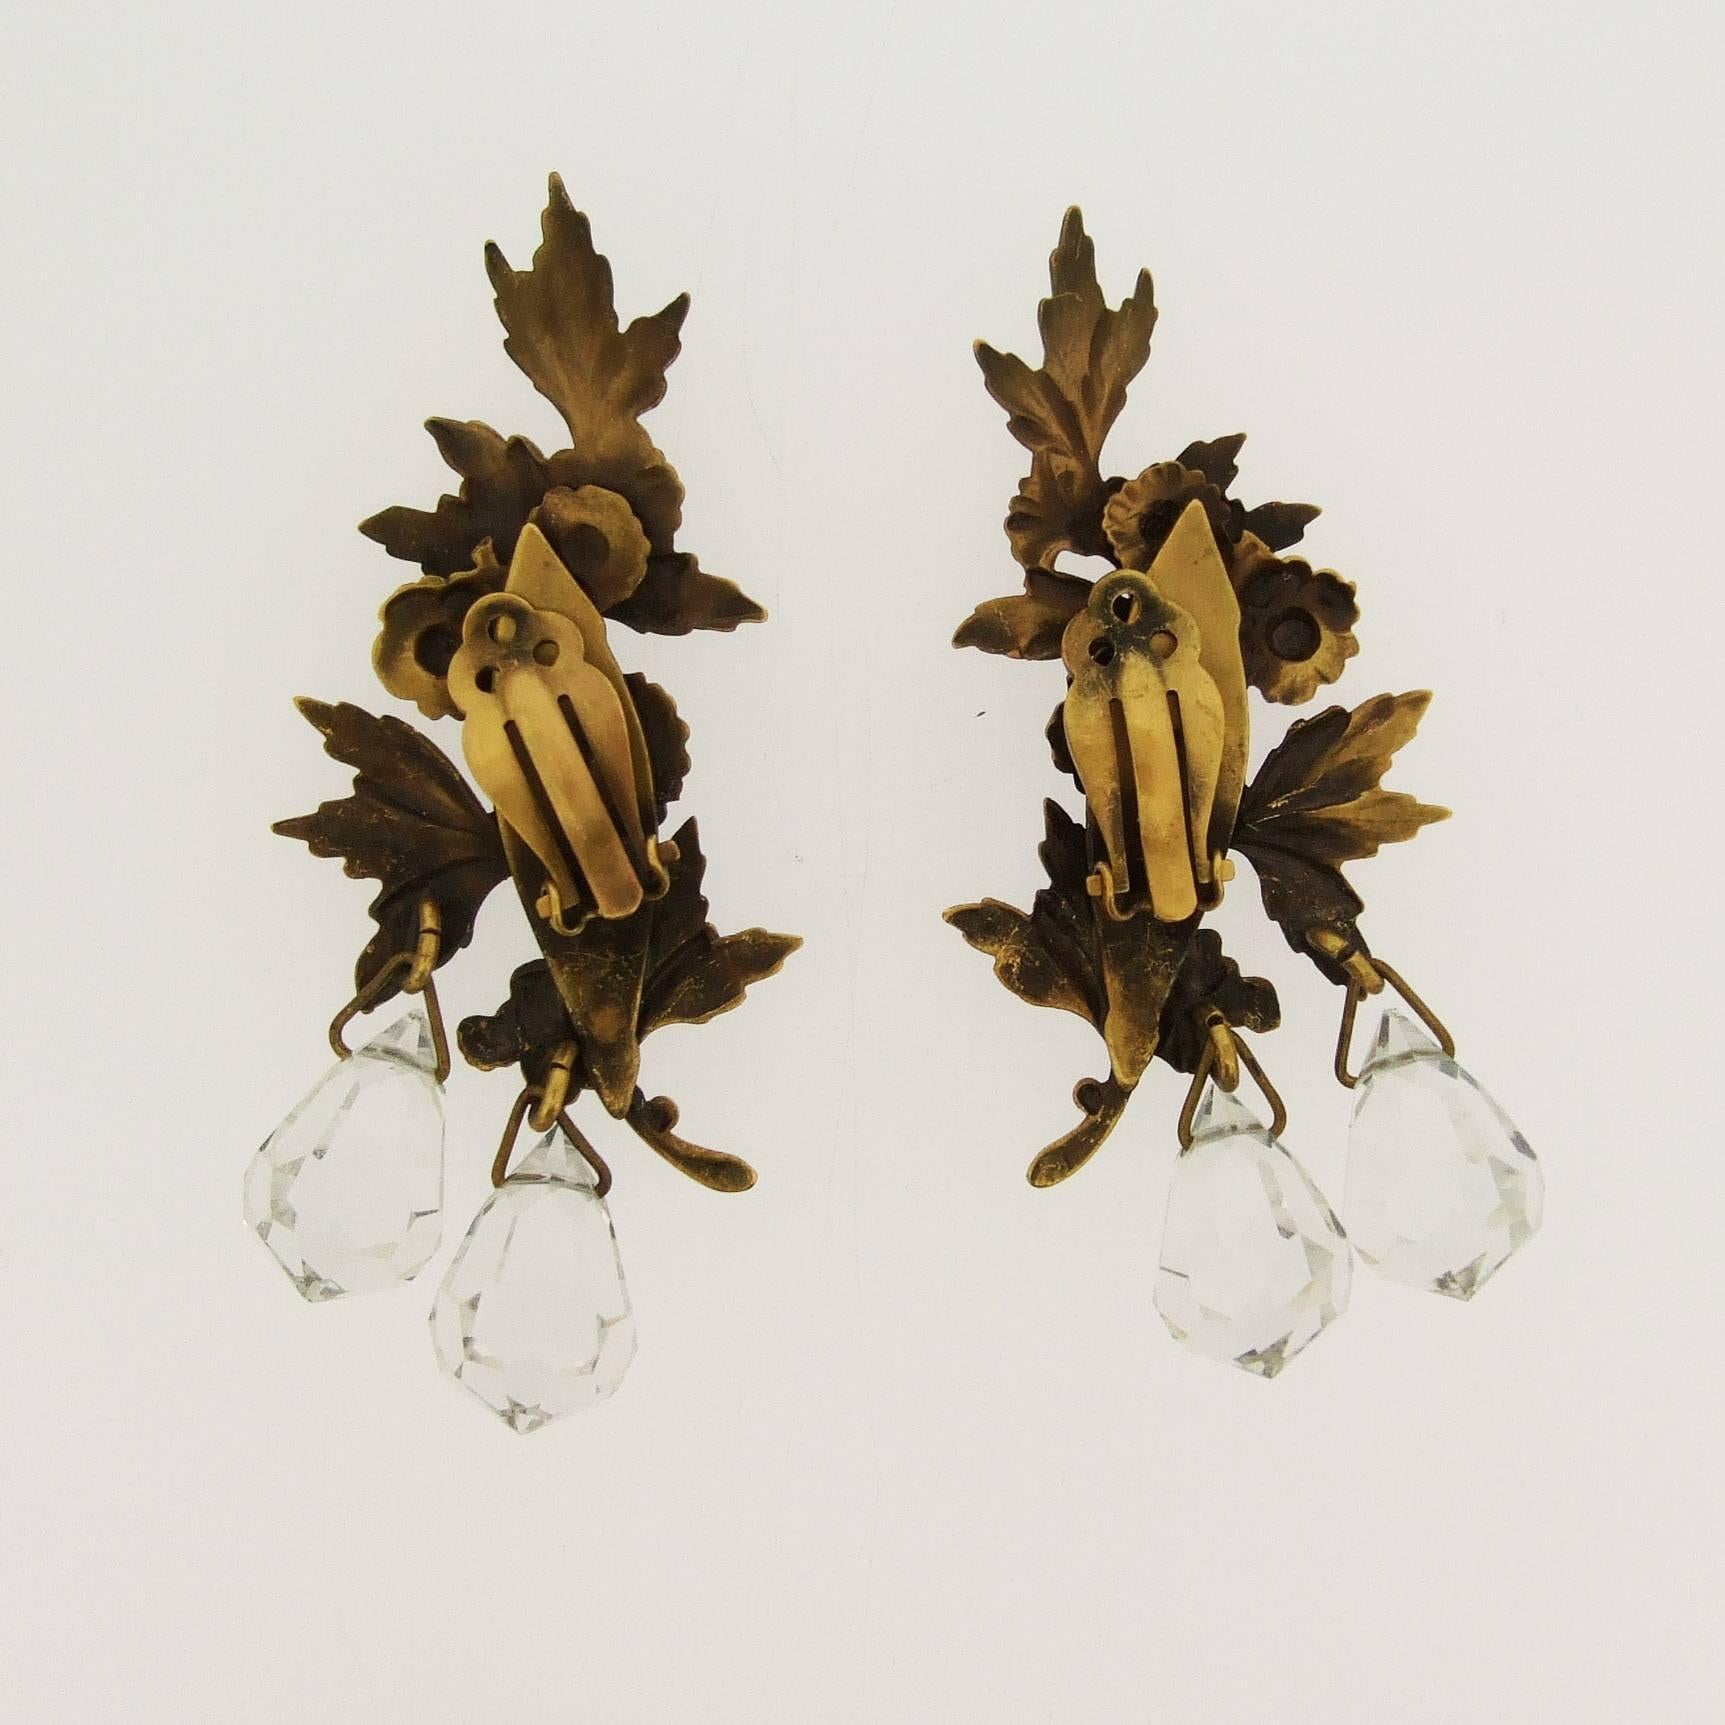 A rare pair of beautiful pair of clip on earrings by Joseff of Hollywood. Featuring a floral spray in bronzed costume metal with a duet of crystal drops. 

They measure 7.3 cm drop by 3.2cm at the widest point, the crystals are 1.2cm deep.